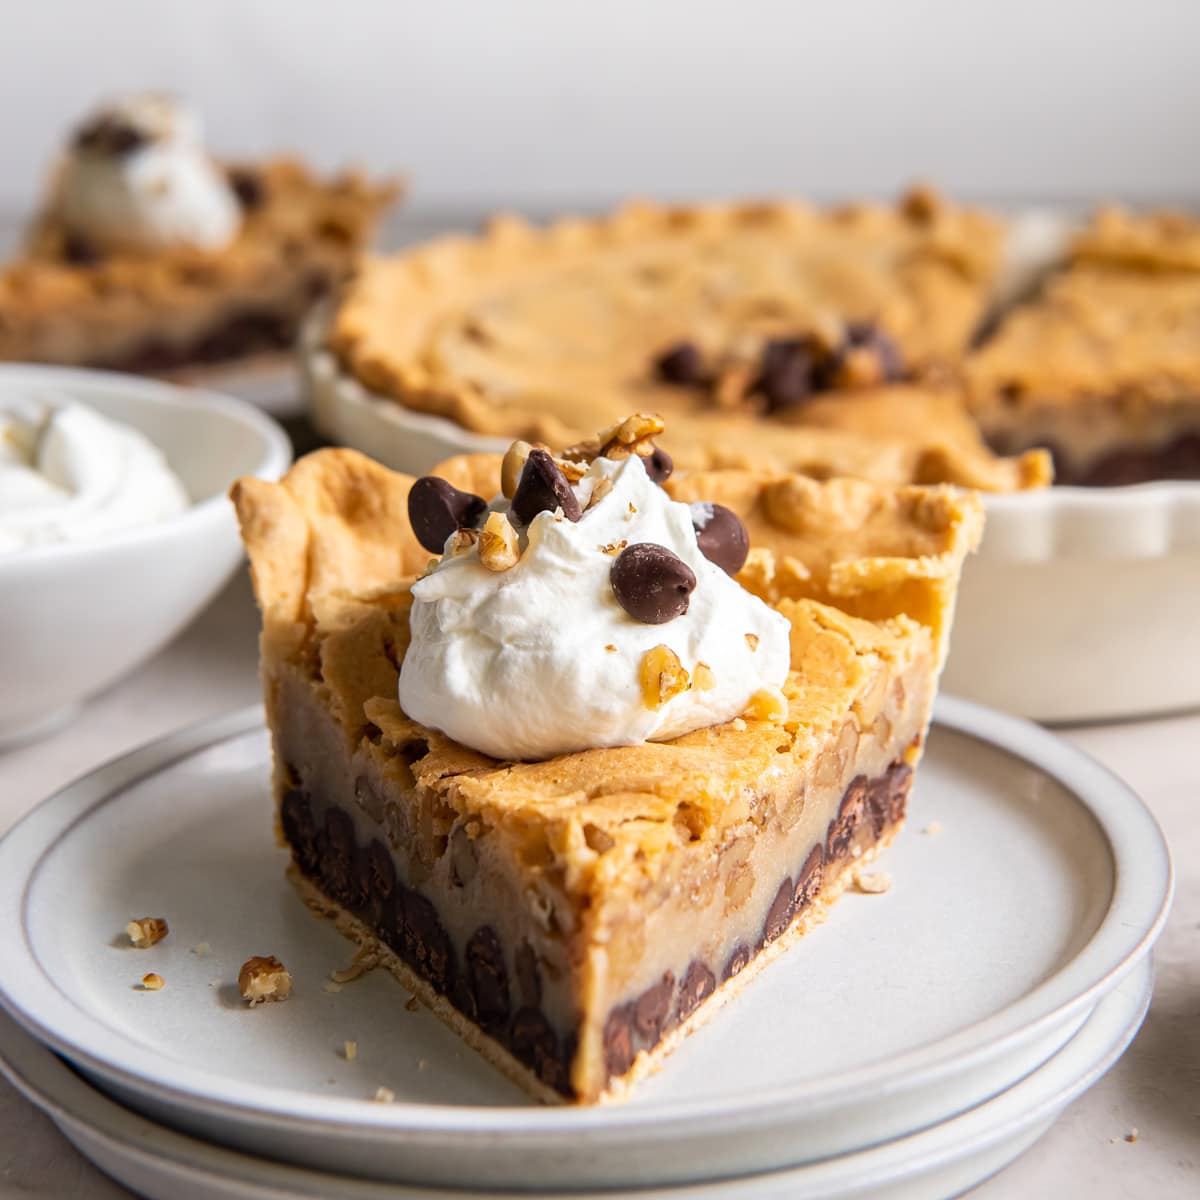 slice of chocolate walnut pie with dollop of whipped cream and chocolate chips.